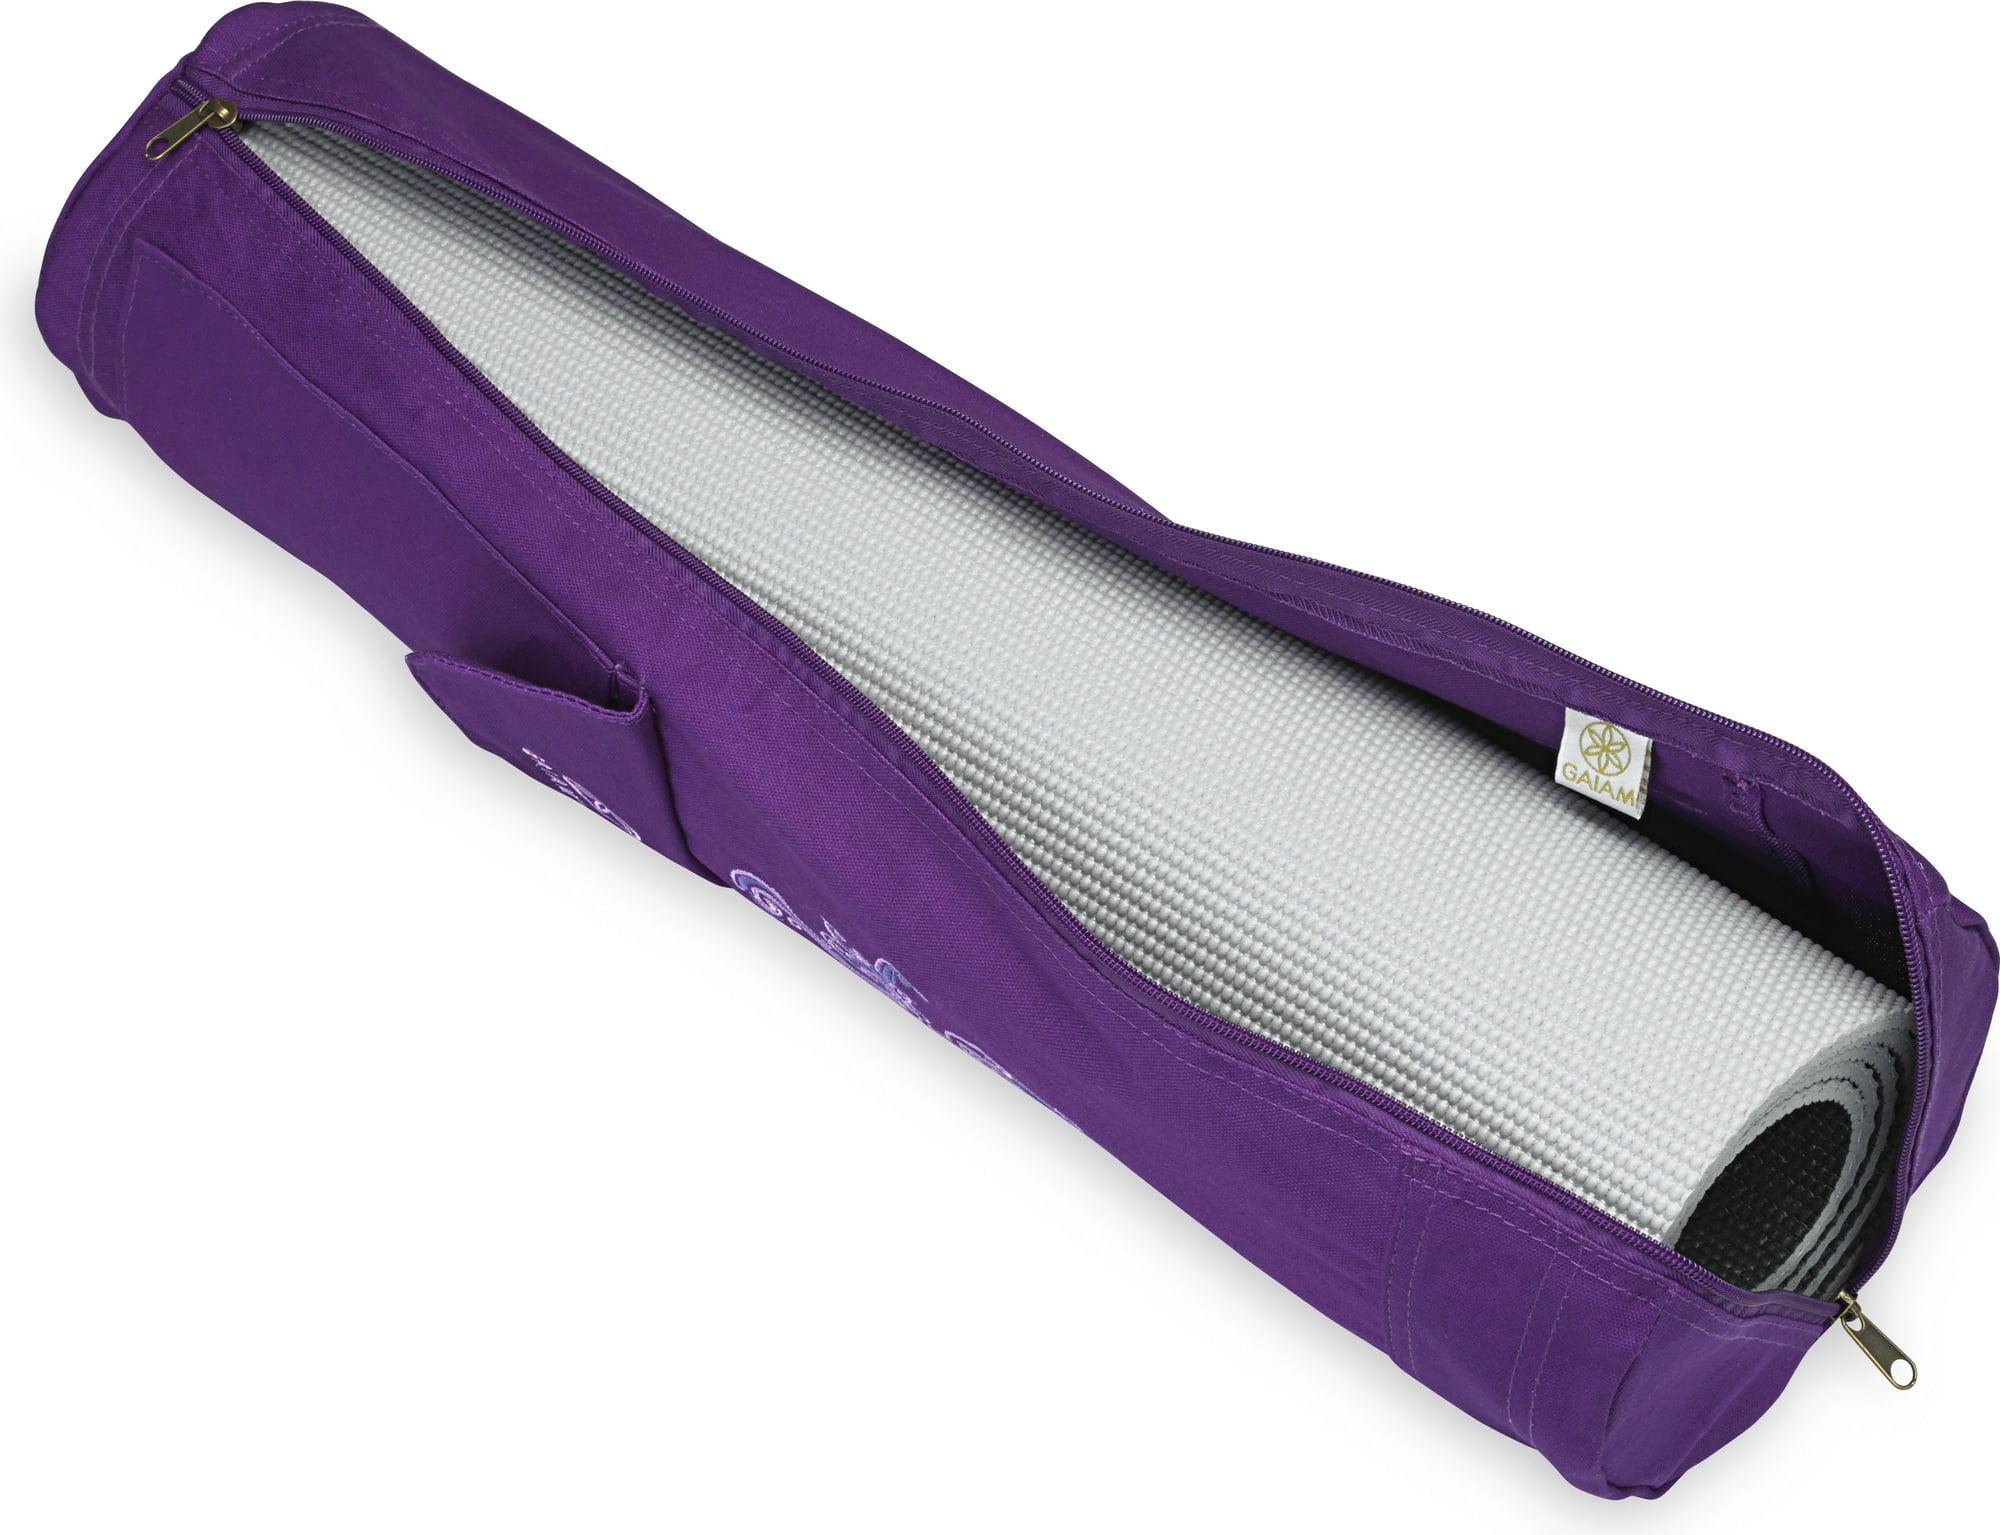 Gaiam Breathable Yoga Bag Tote Purple with Mesh Design fits Mat Up To 26 x  72